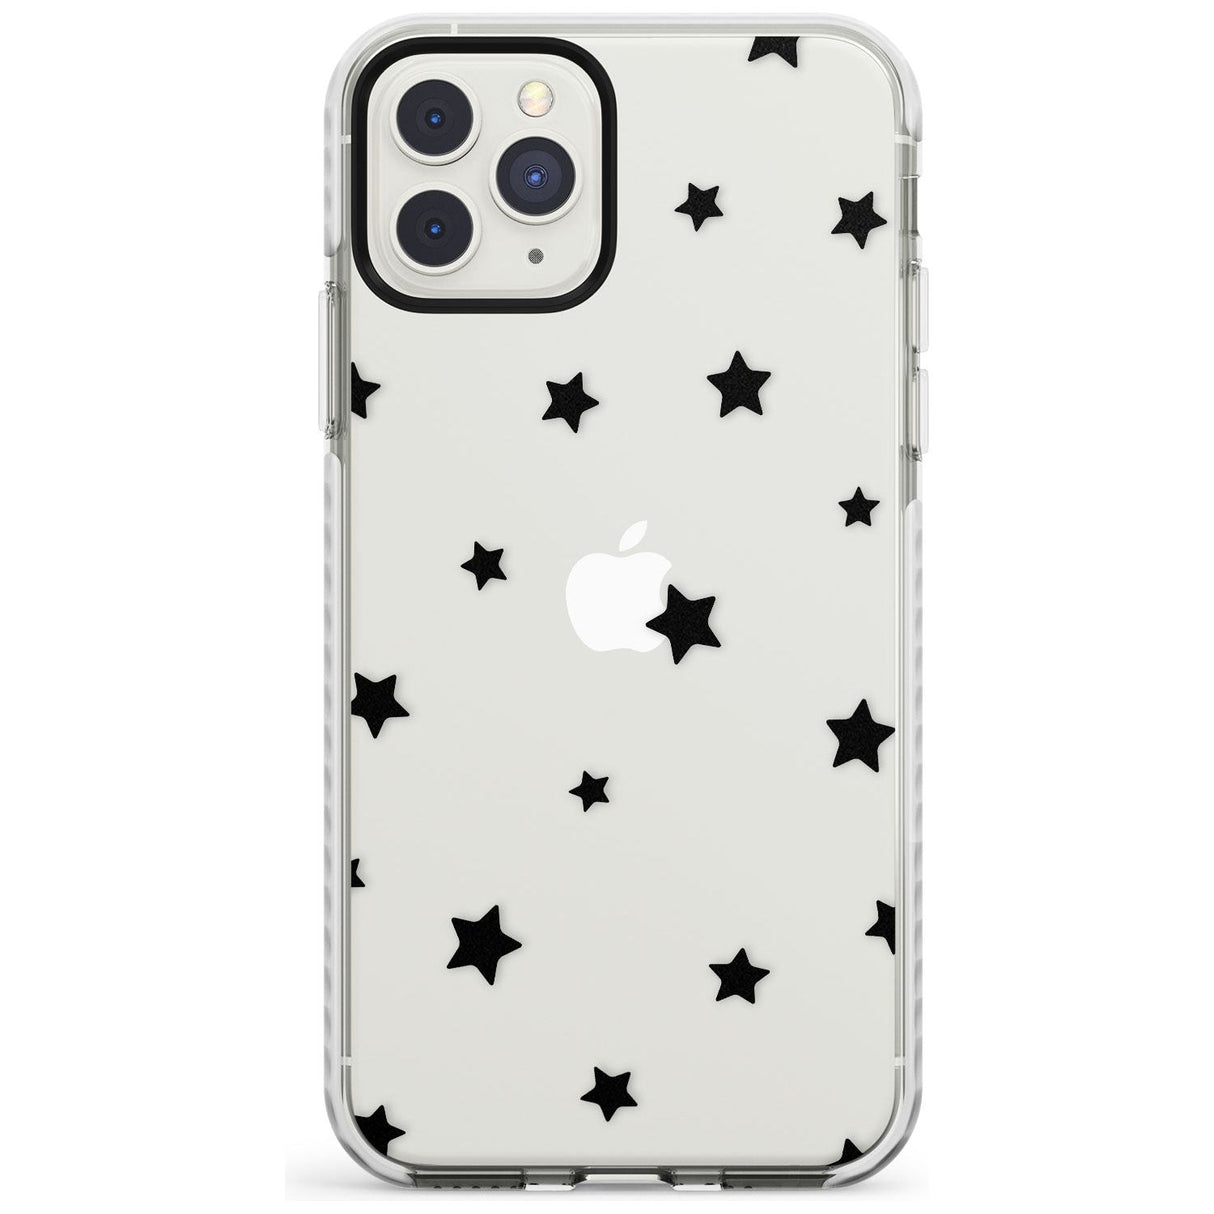 Black Stars Pattern Impact Phone Case for iPhone 11 Pro Max